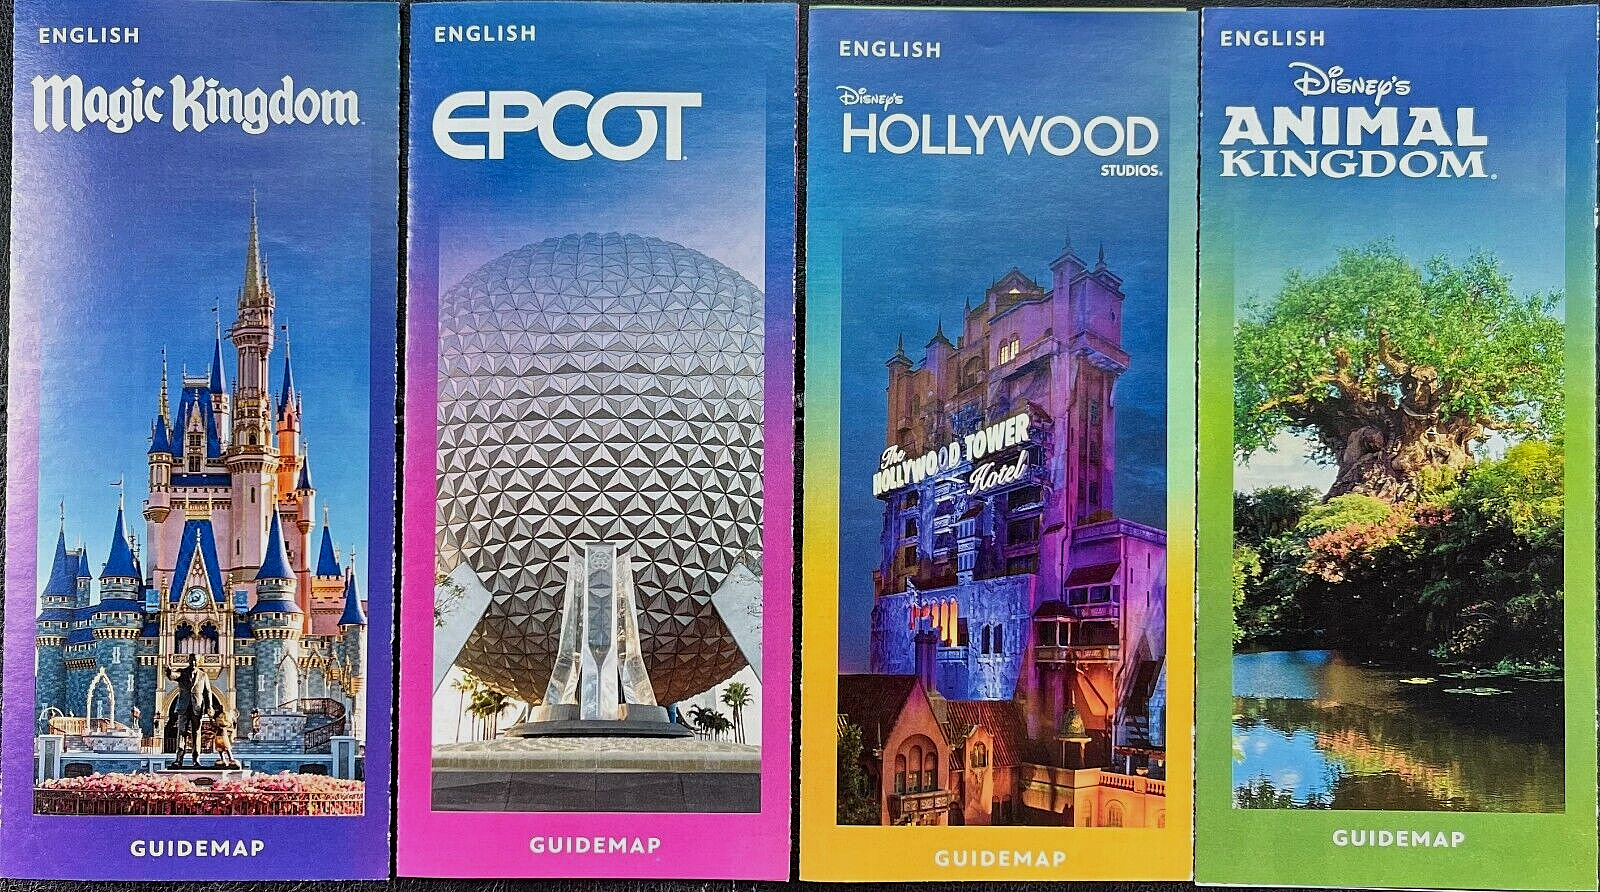 NEW 2023 Walt Disney World Theme Park Guide Maps 4 Current Maps Newest Available